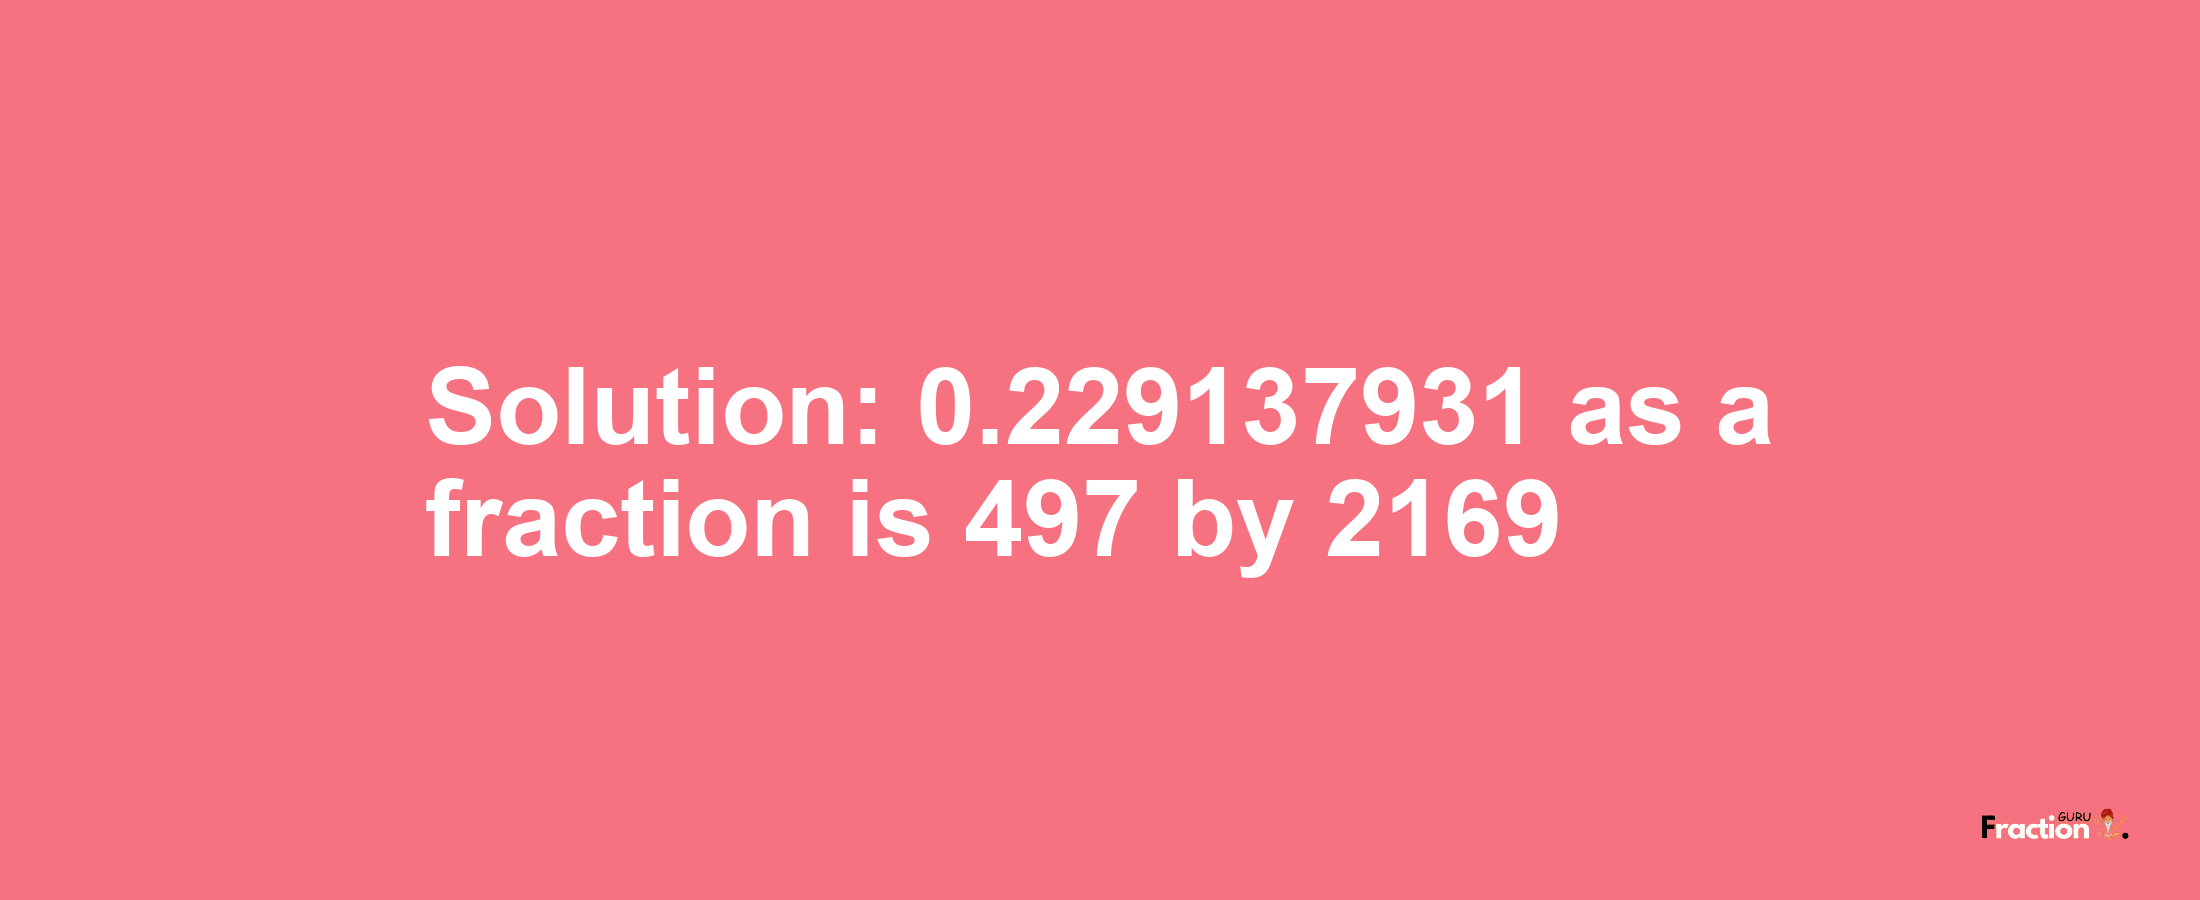 Solution:0.229137931 as a fraction is 497/2169